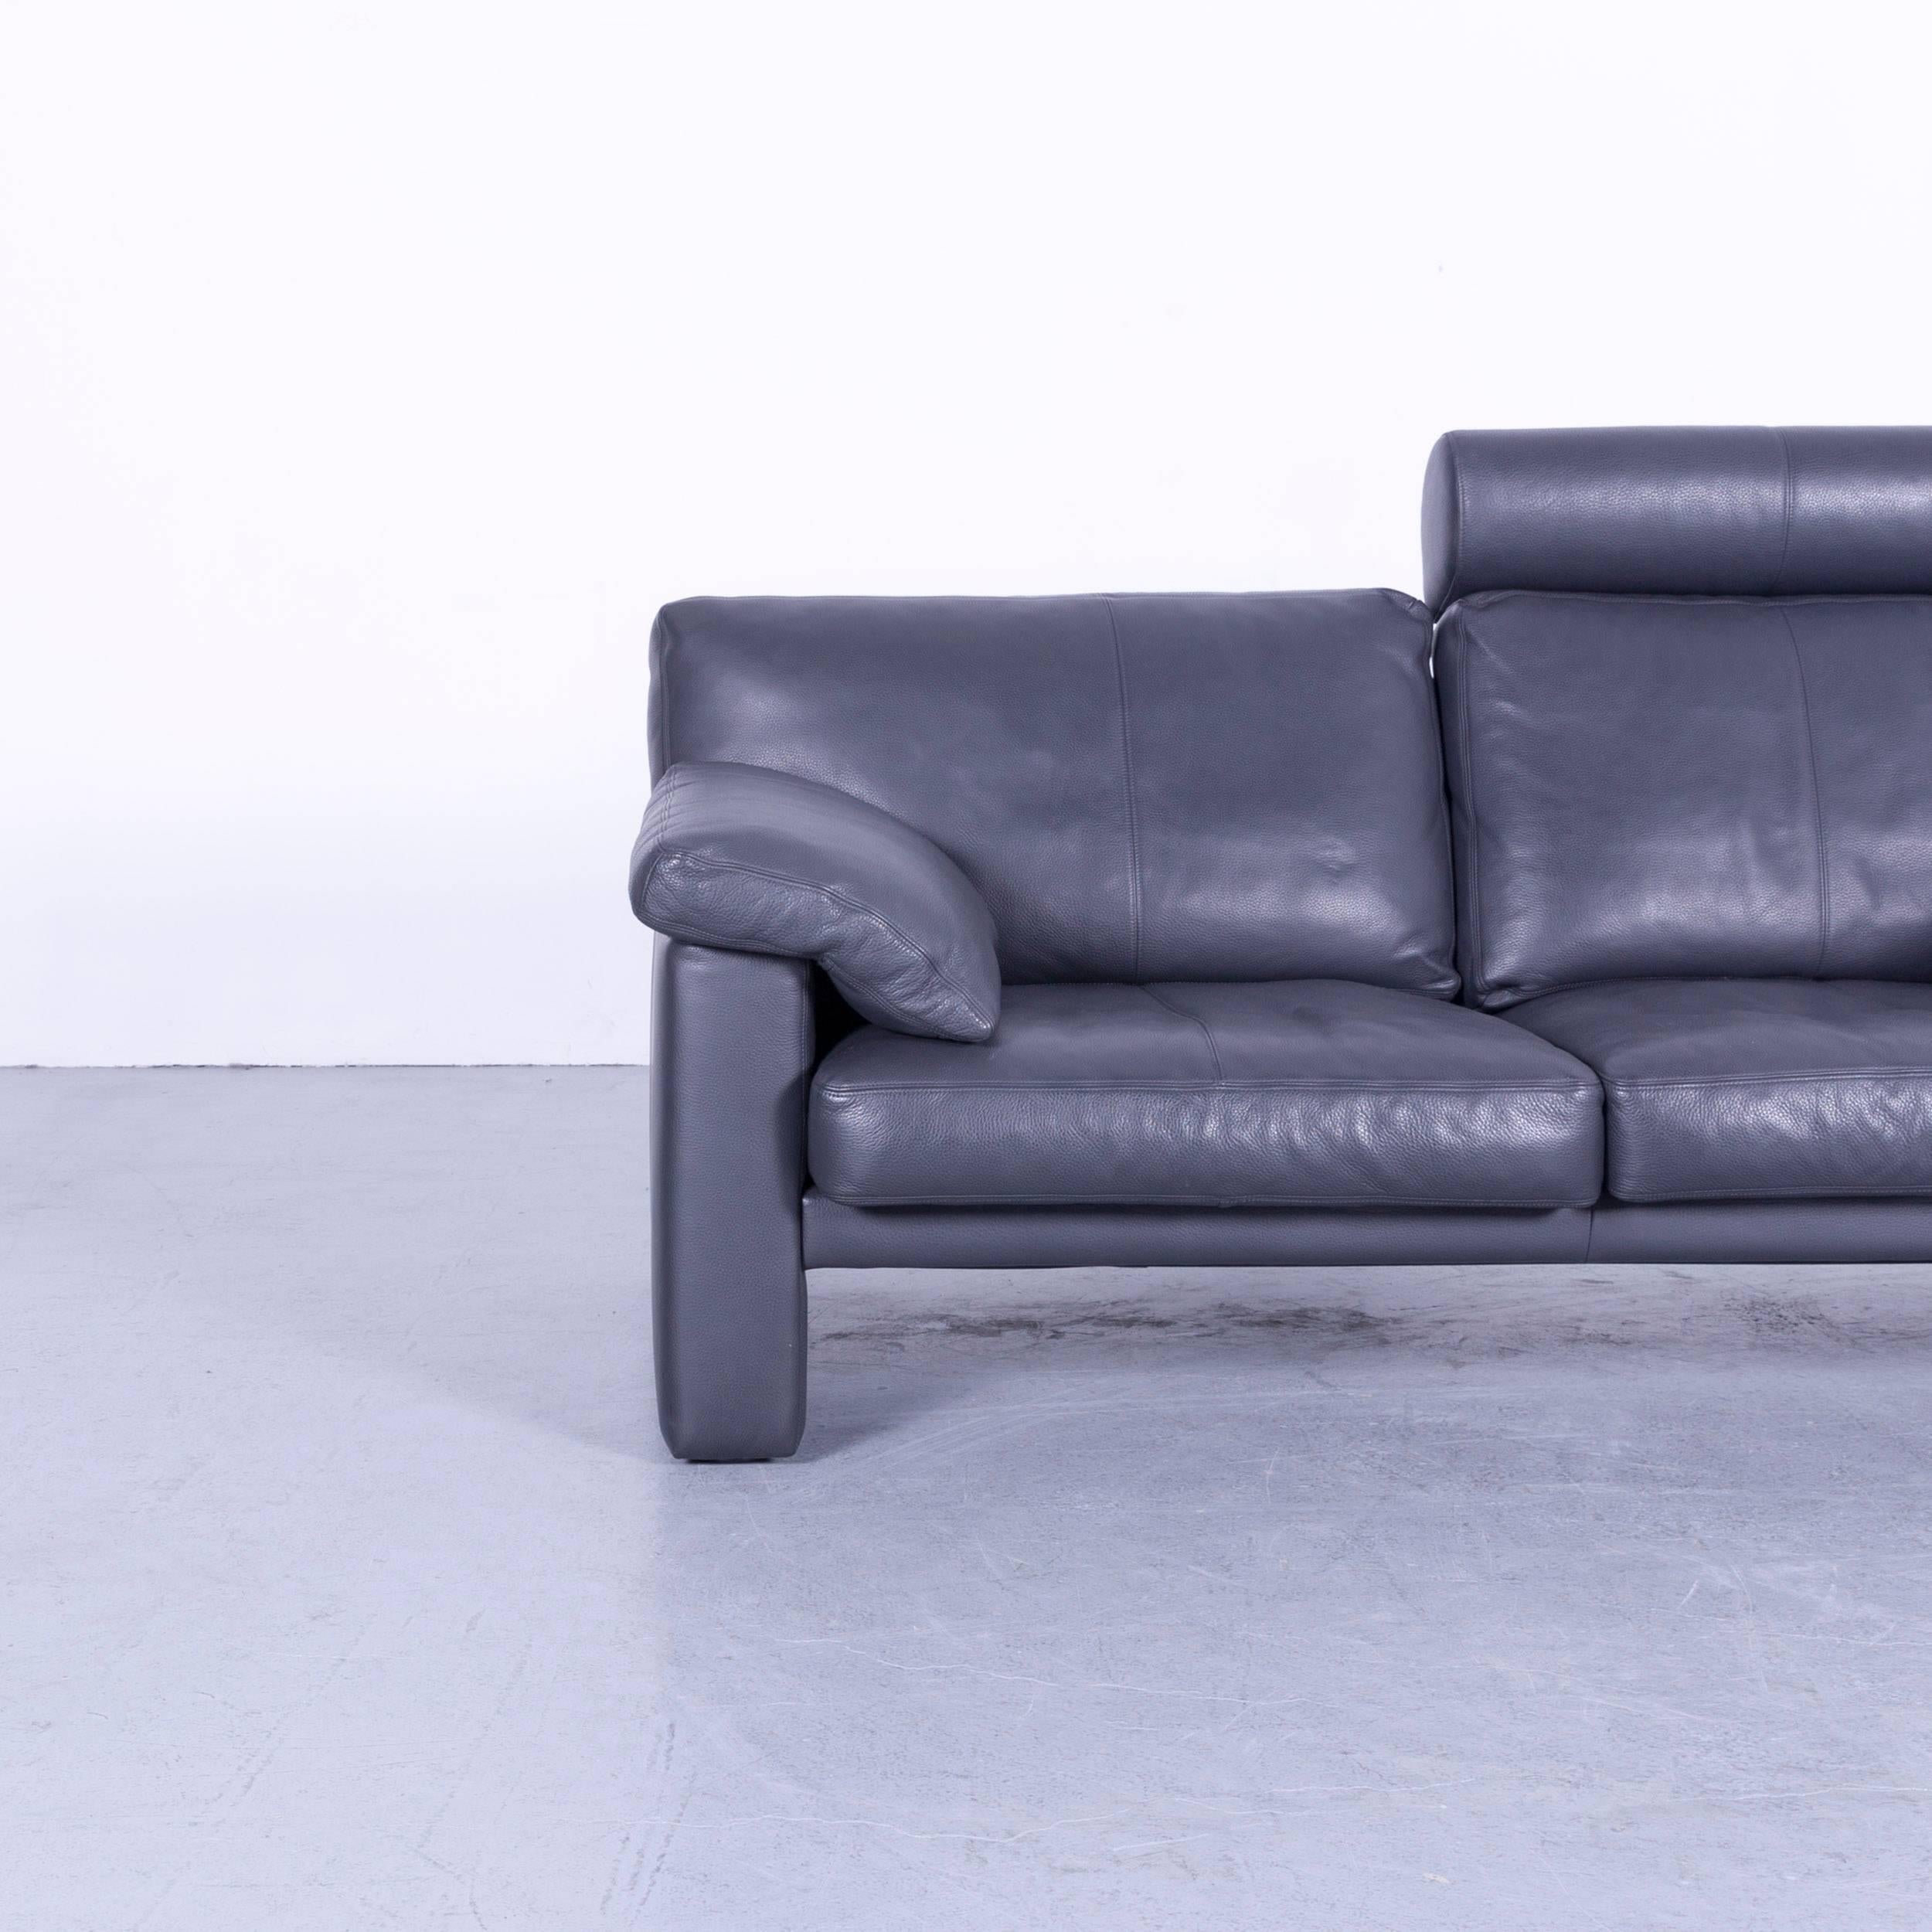 German Erpo CL 300 Leather Sofa Grey Two-Seat Couch For Sale